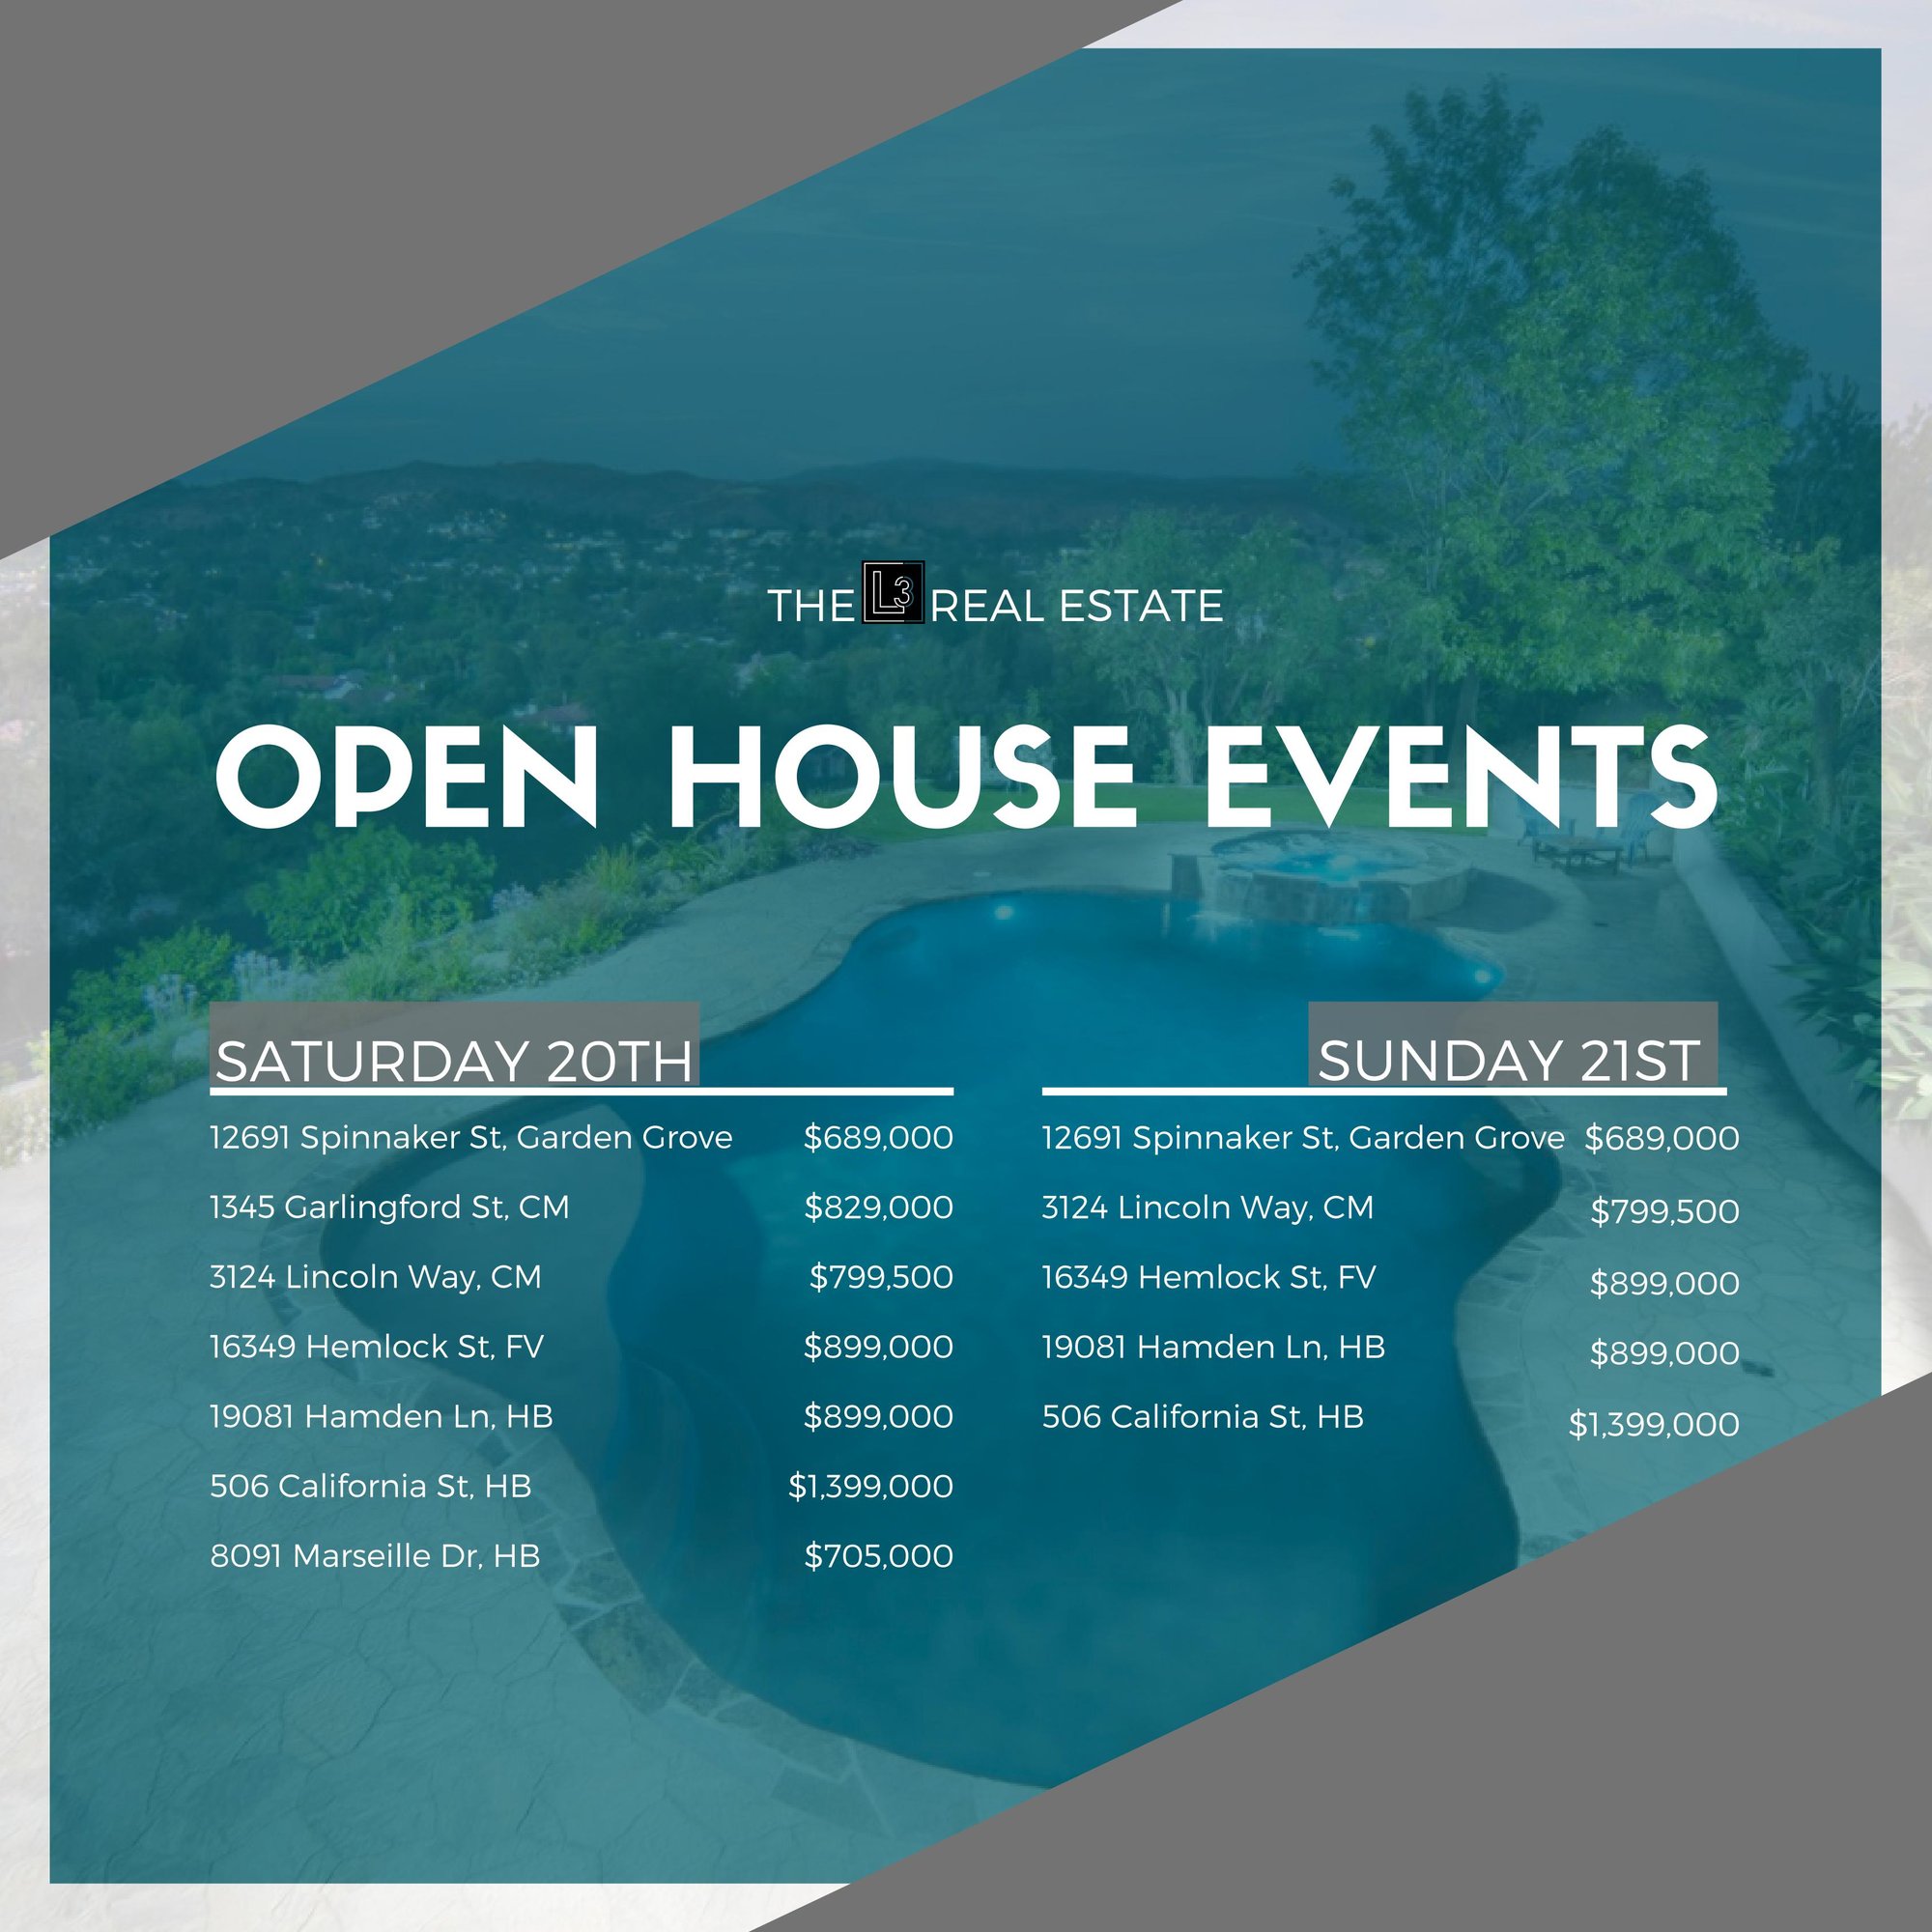 Open House Events 10/20-10/21